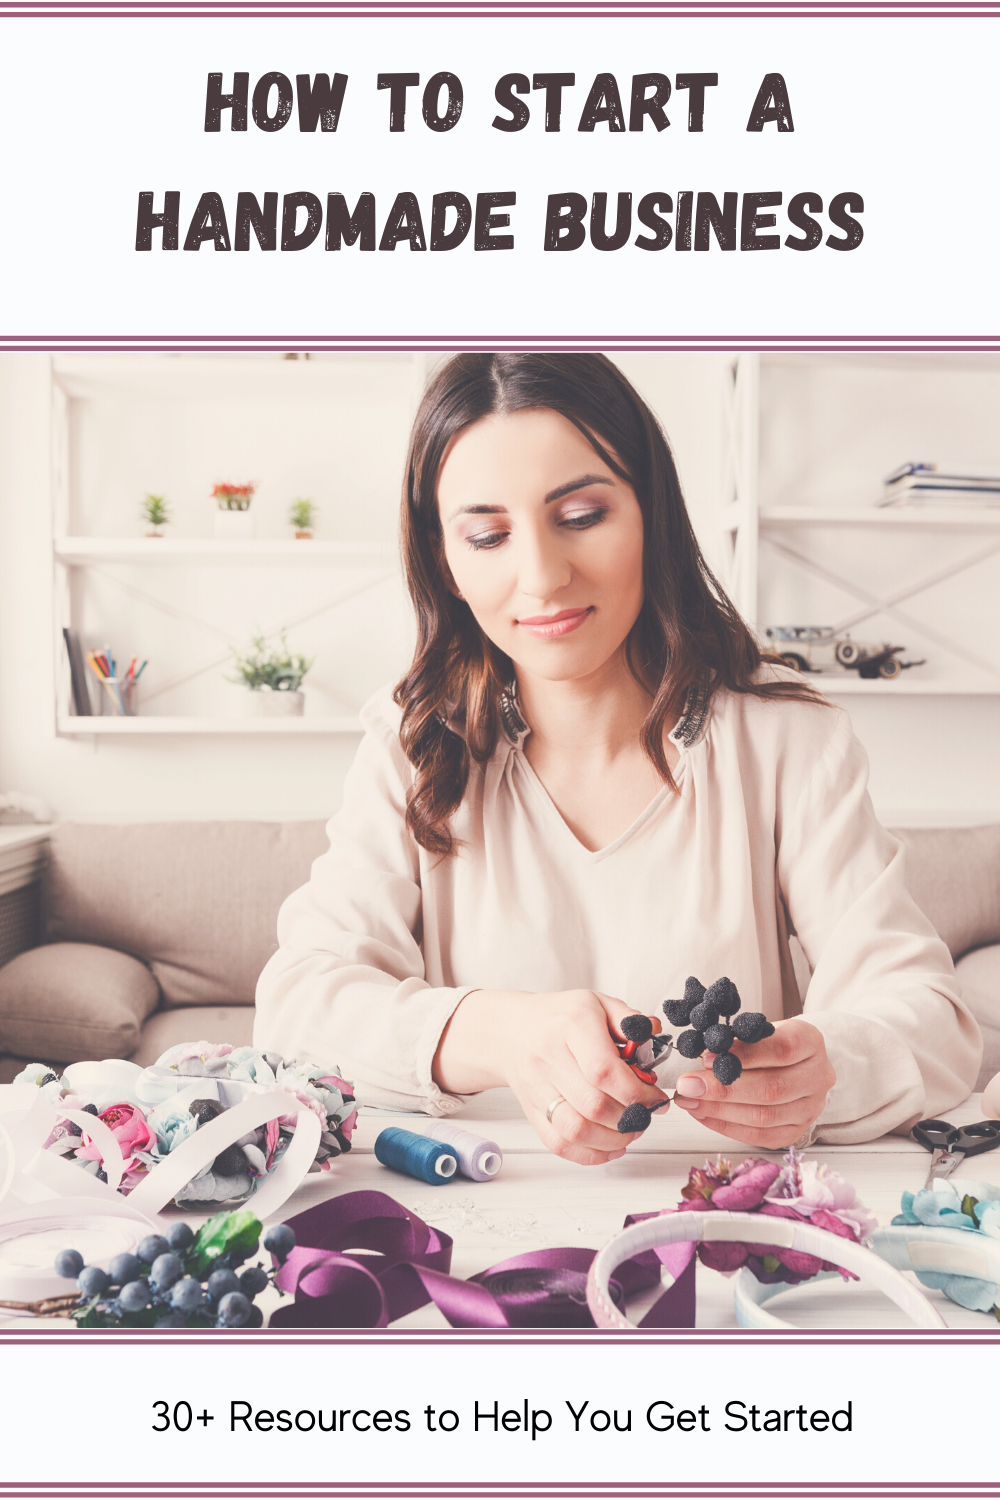 16 New Projects to Make & Sell! More Sewing to Sell―Take Your Handmade Business to the Next Level